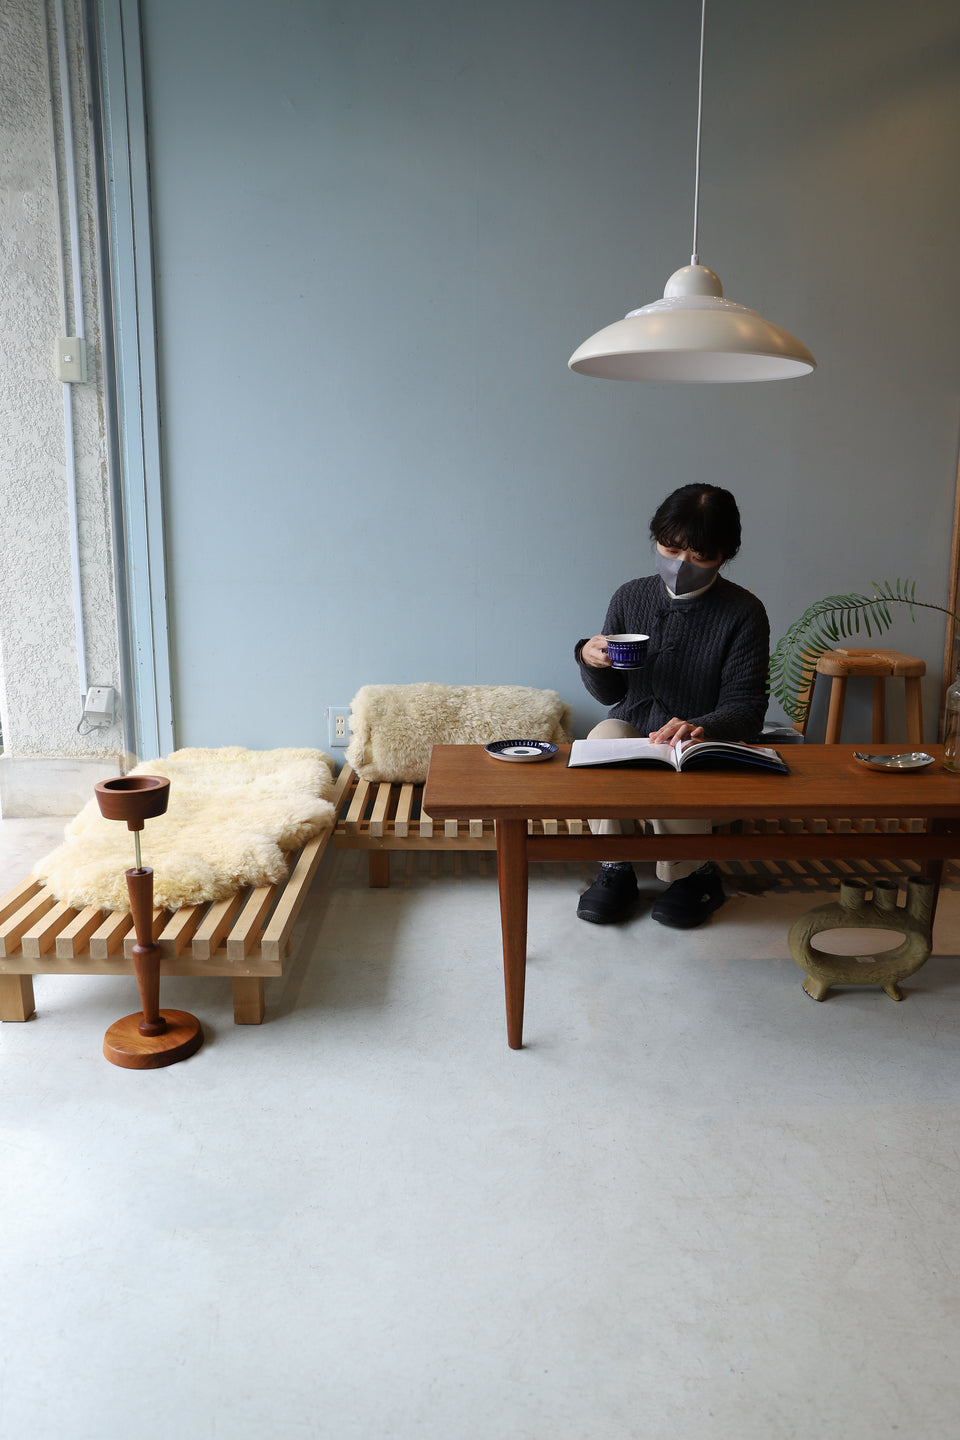 Charlotte Perriand Style Wooden Slit Low Bench/スリット ローベンチ 木製 シャルロット・ペリアン スタイル